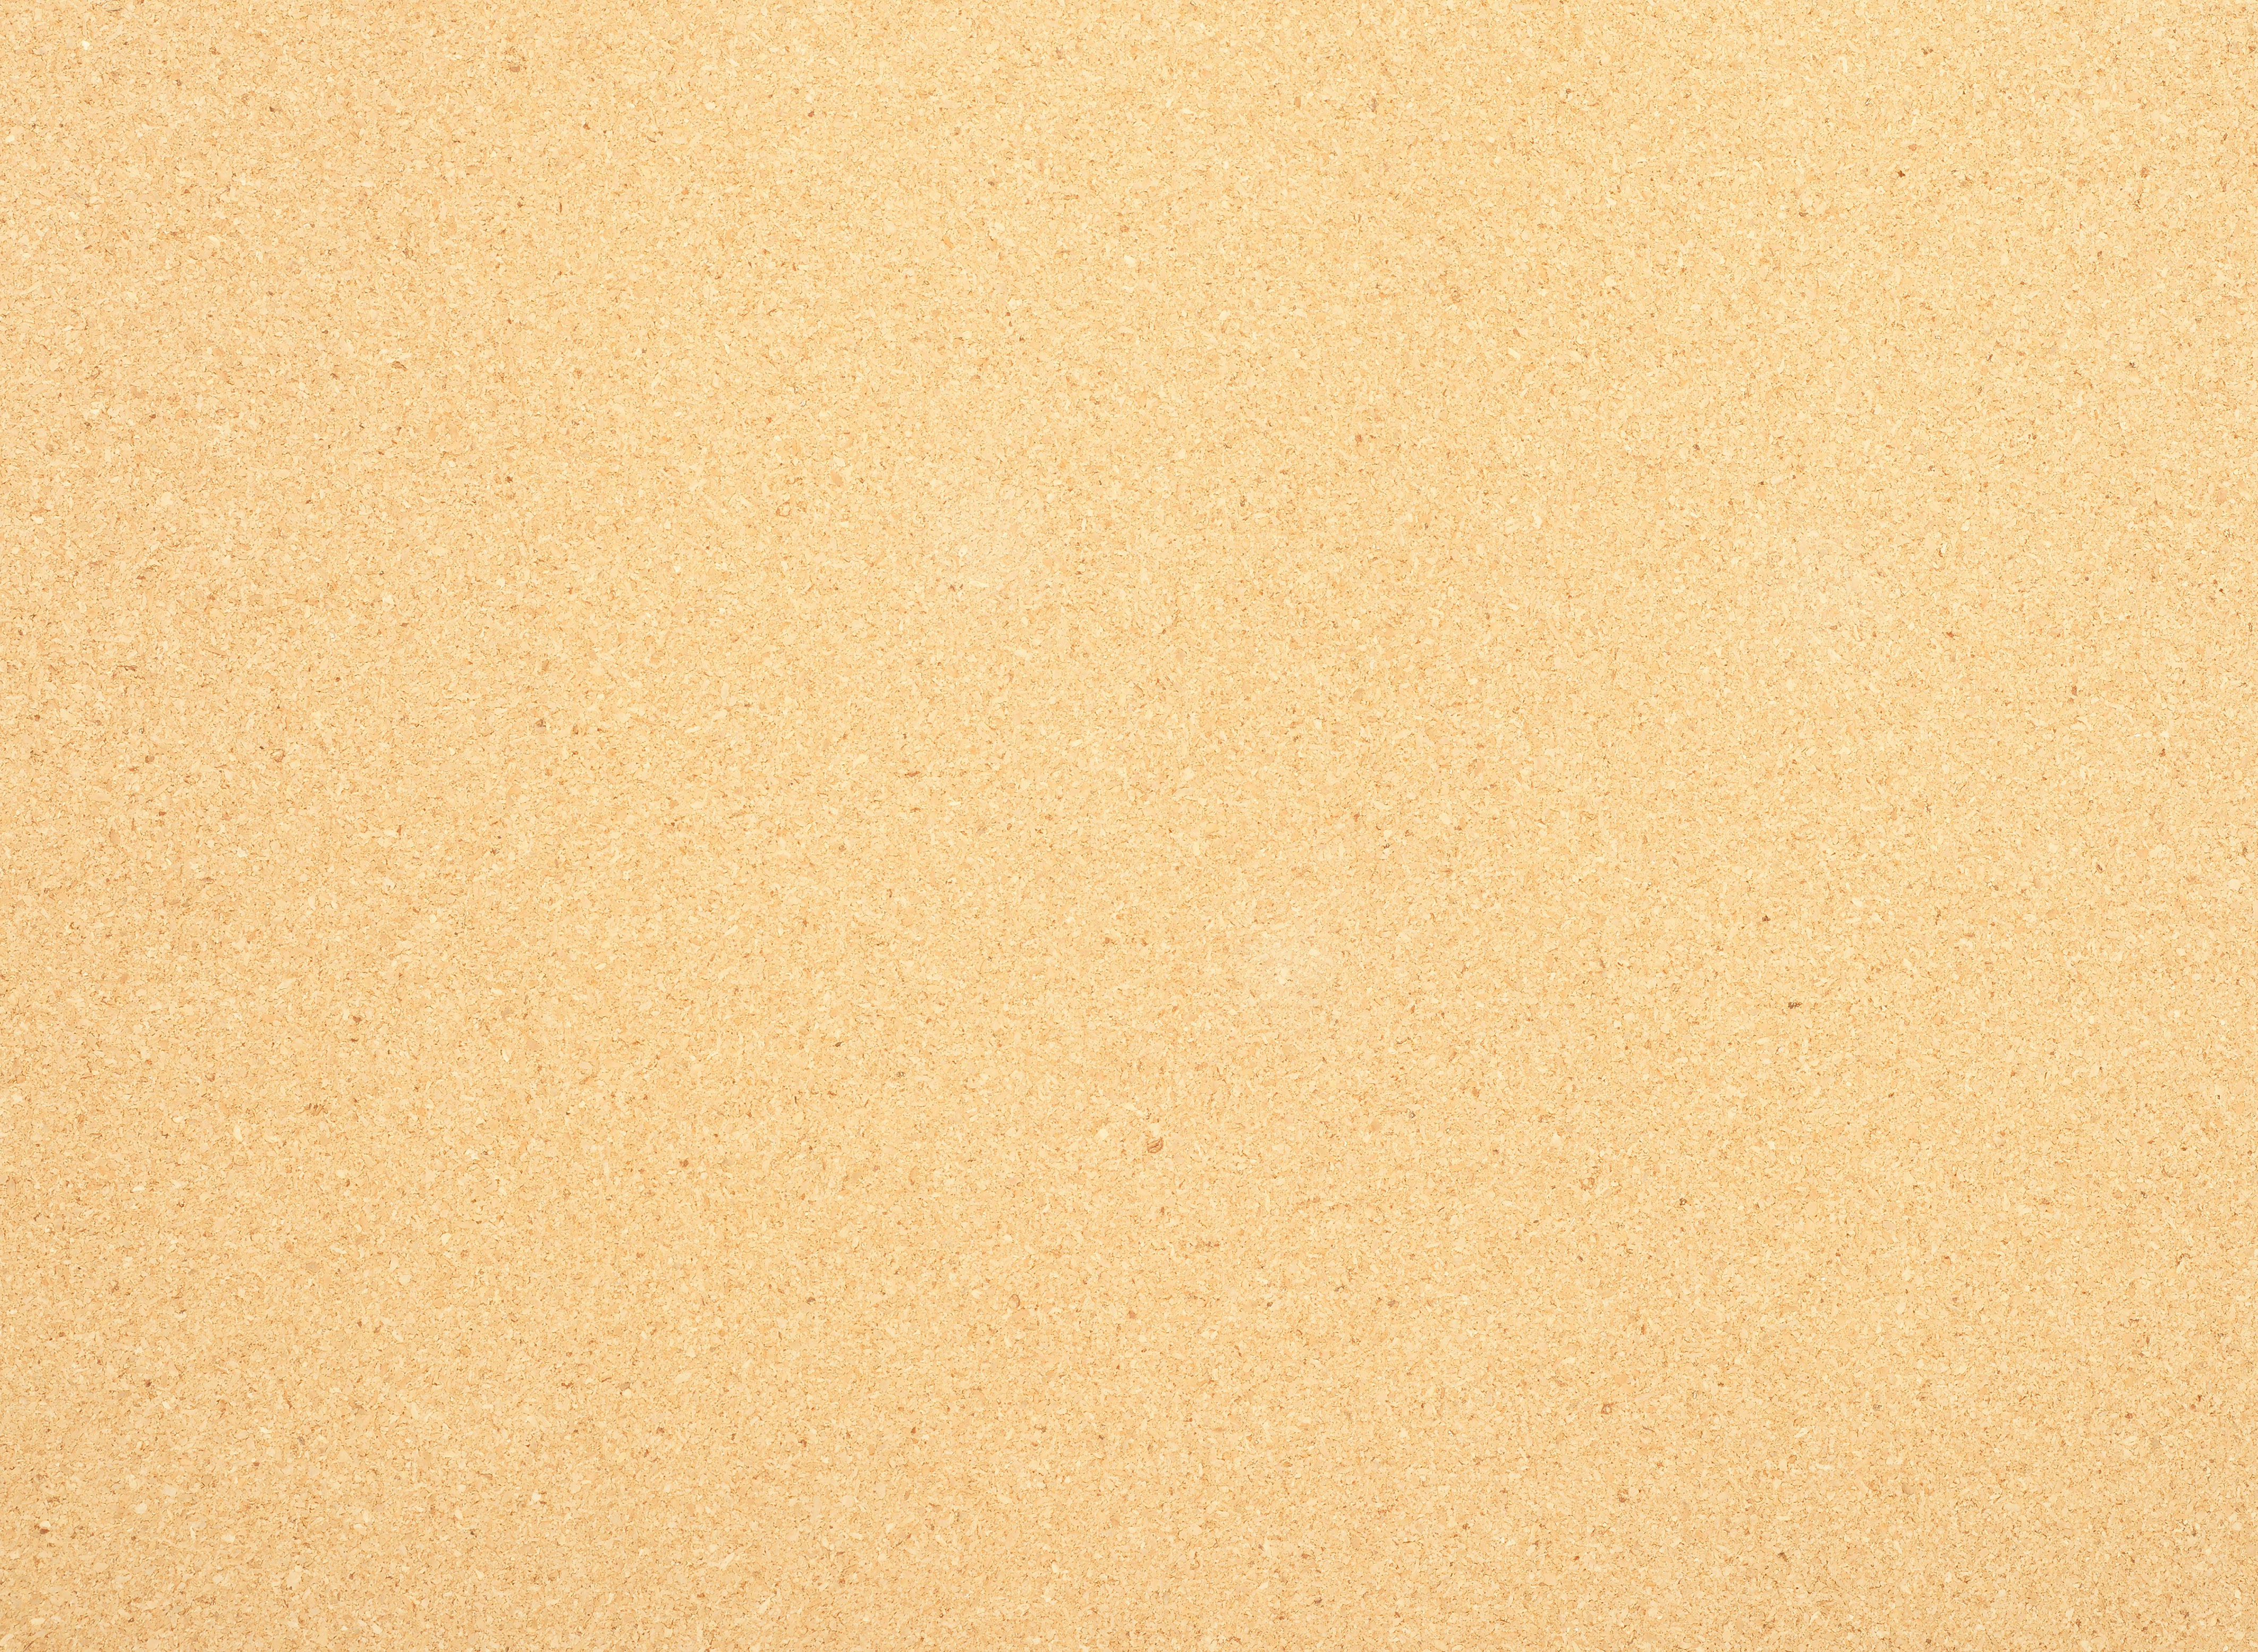 Another big cork texture background image